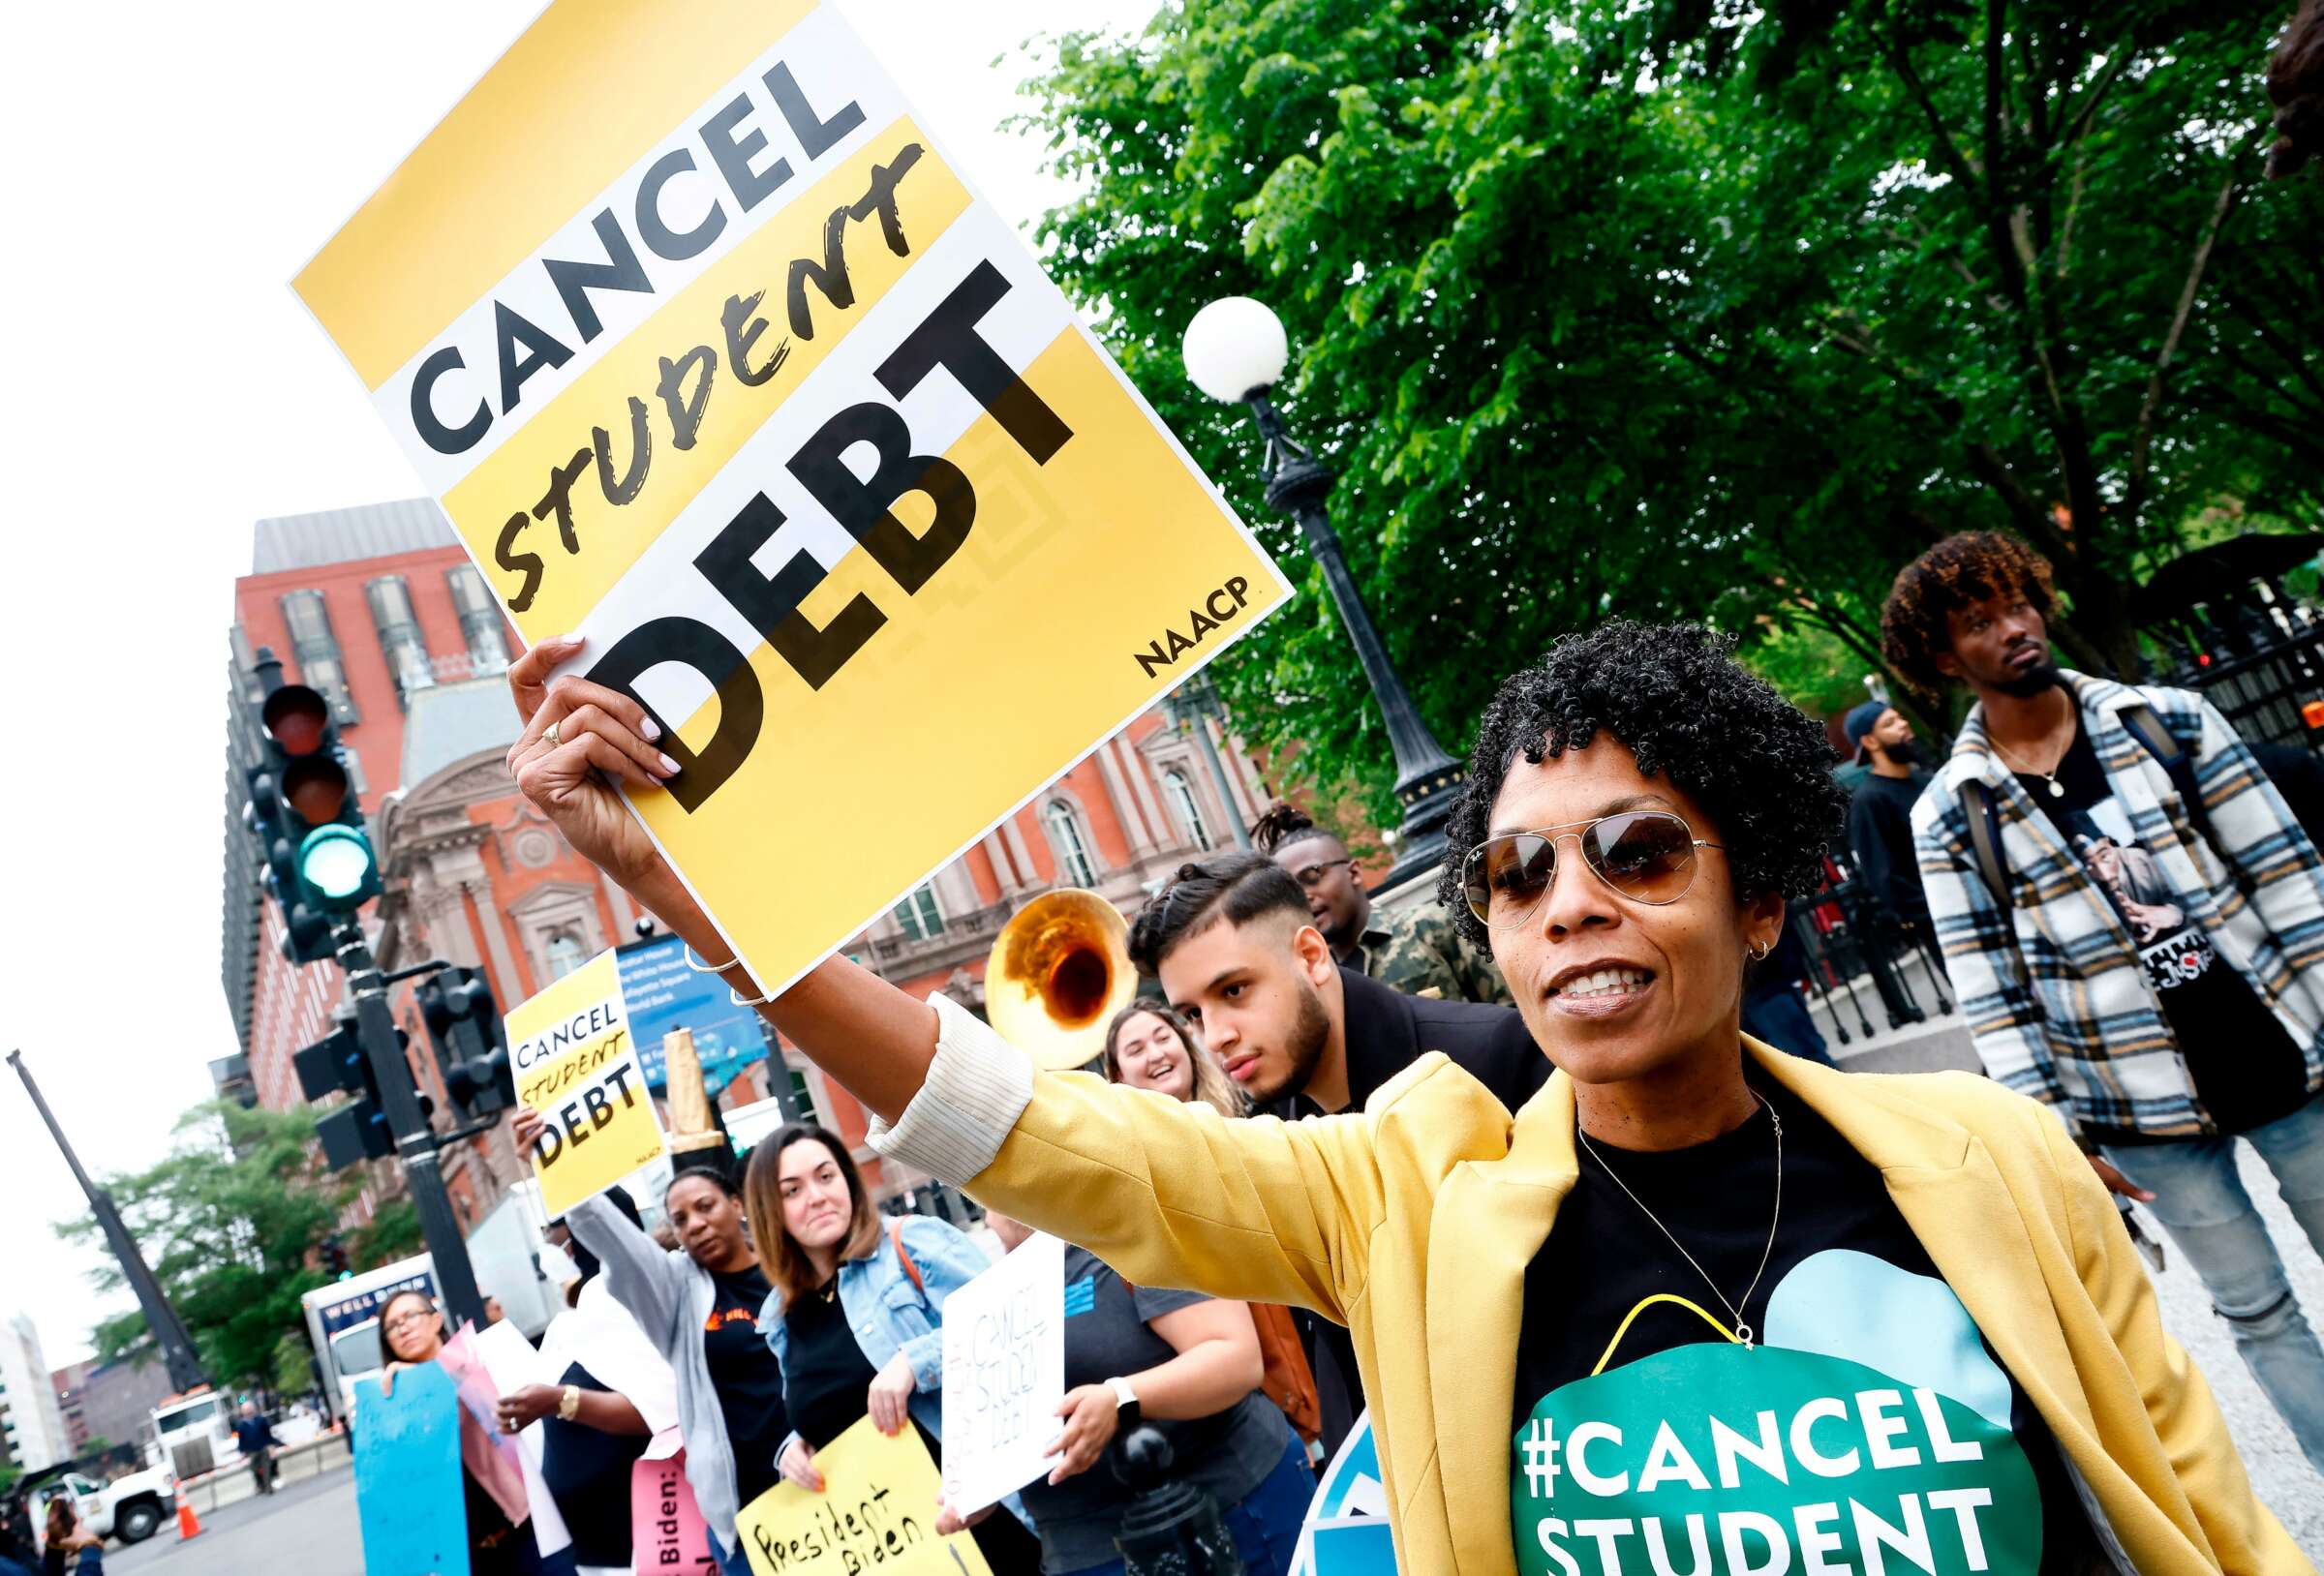 Democrats Tell Biden to “Deliver on Your Promise” of $20,000 Student Debt Relief